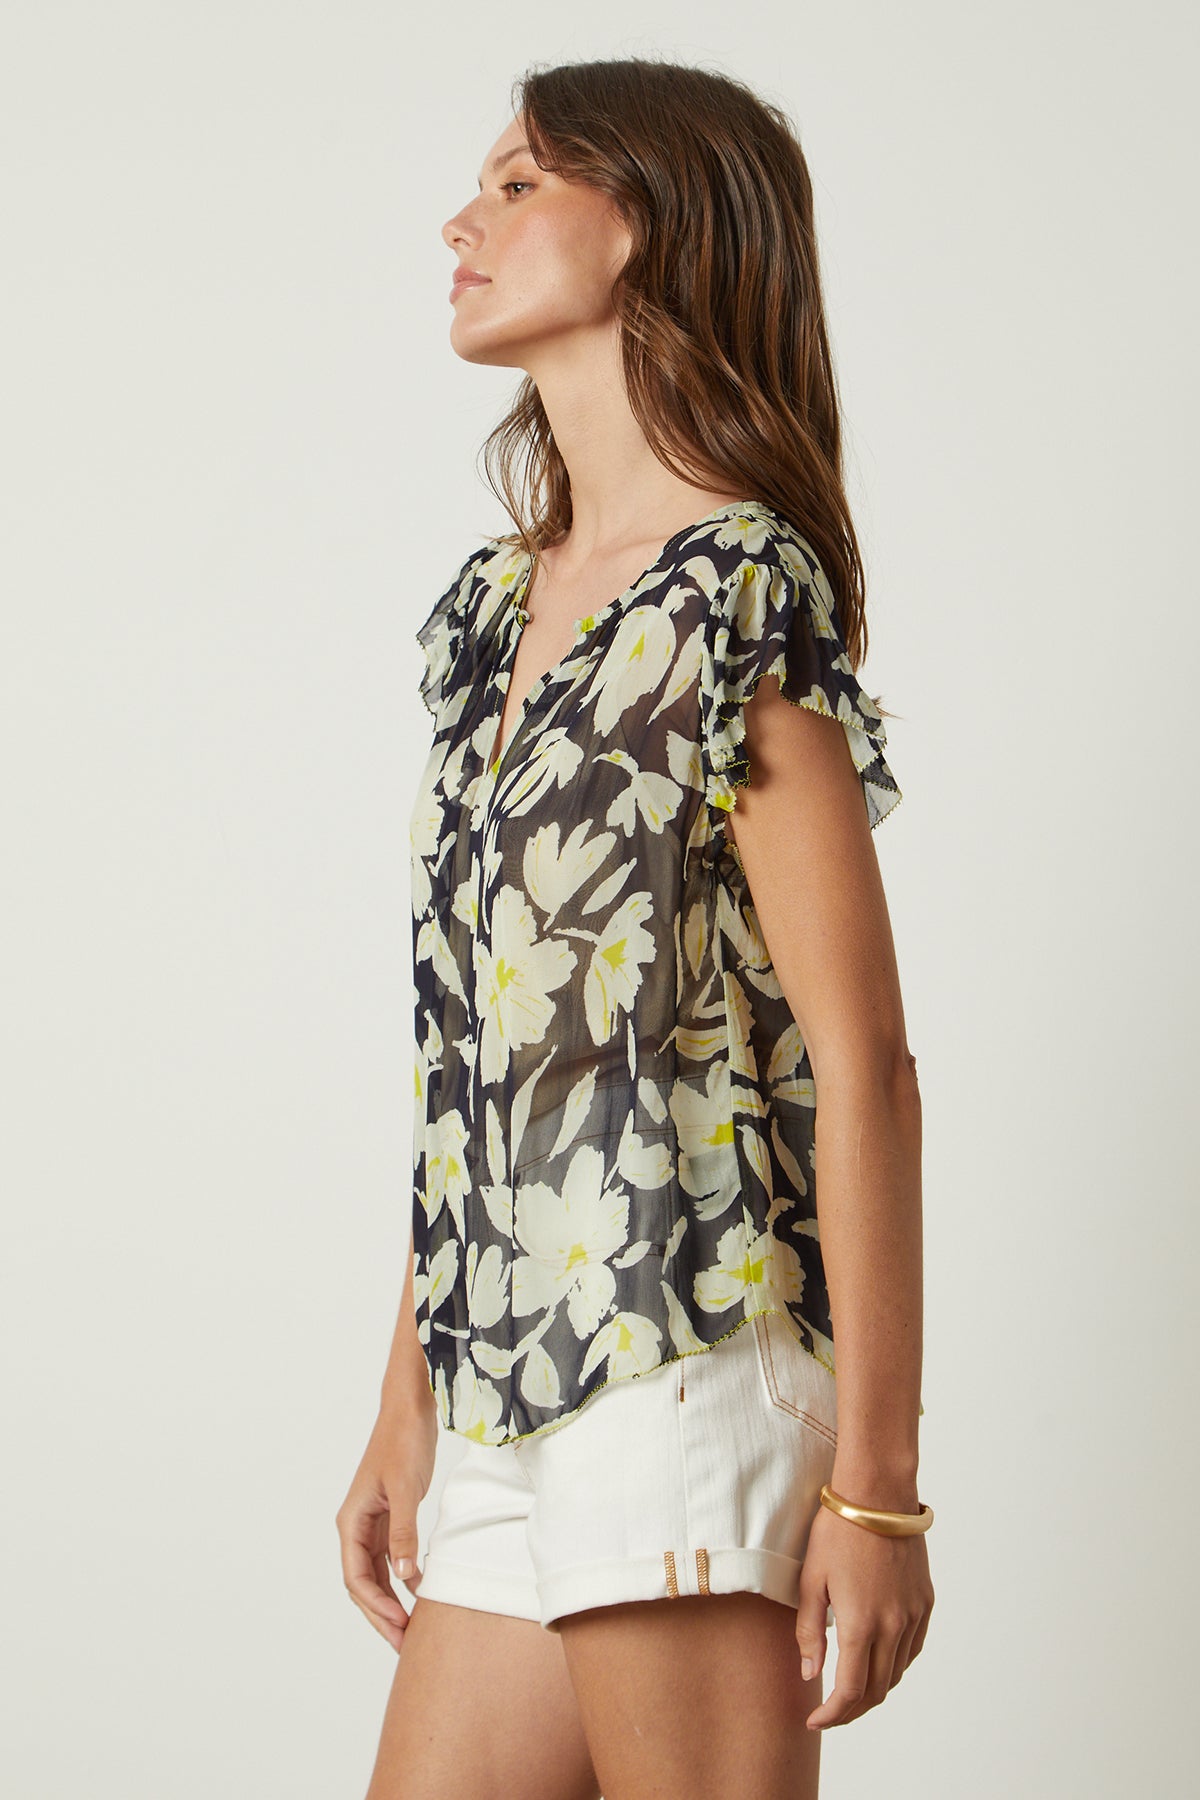 a woman wearing shorts and a LUCIA PRINTED TOP by Velvet by Graham & Spencer.-26143082774721